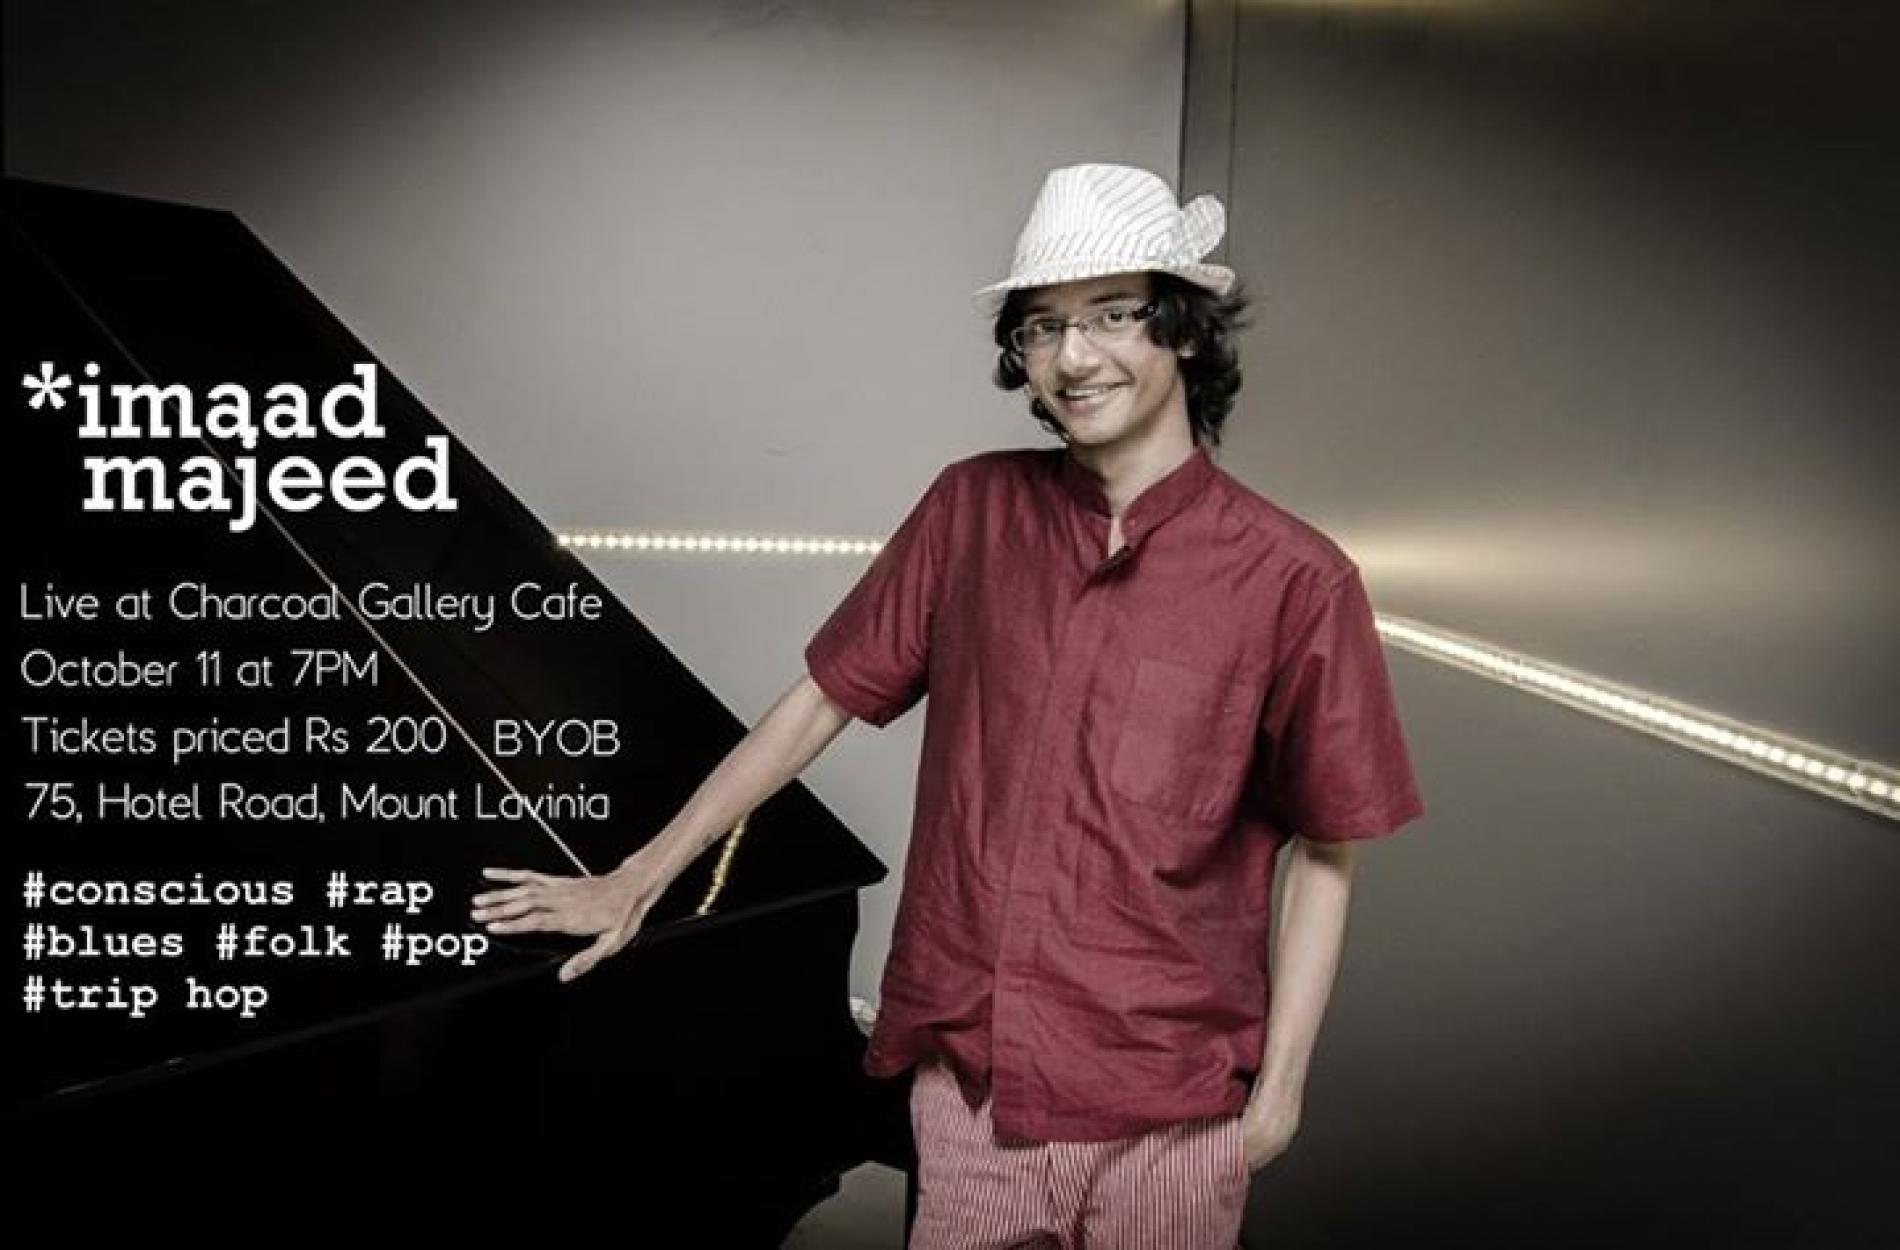 Imaad Majeed @ The Charcoal Gallery Cafe